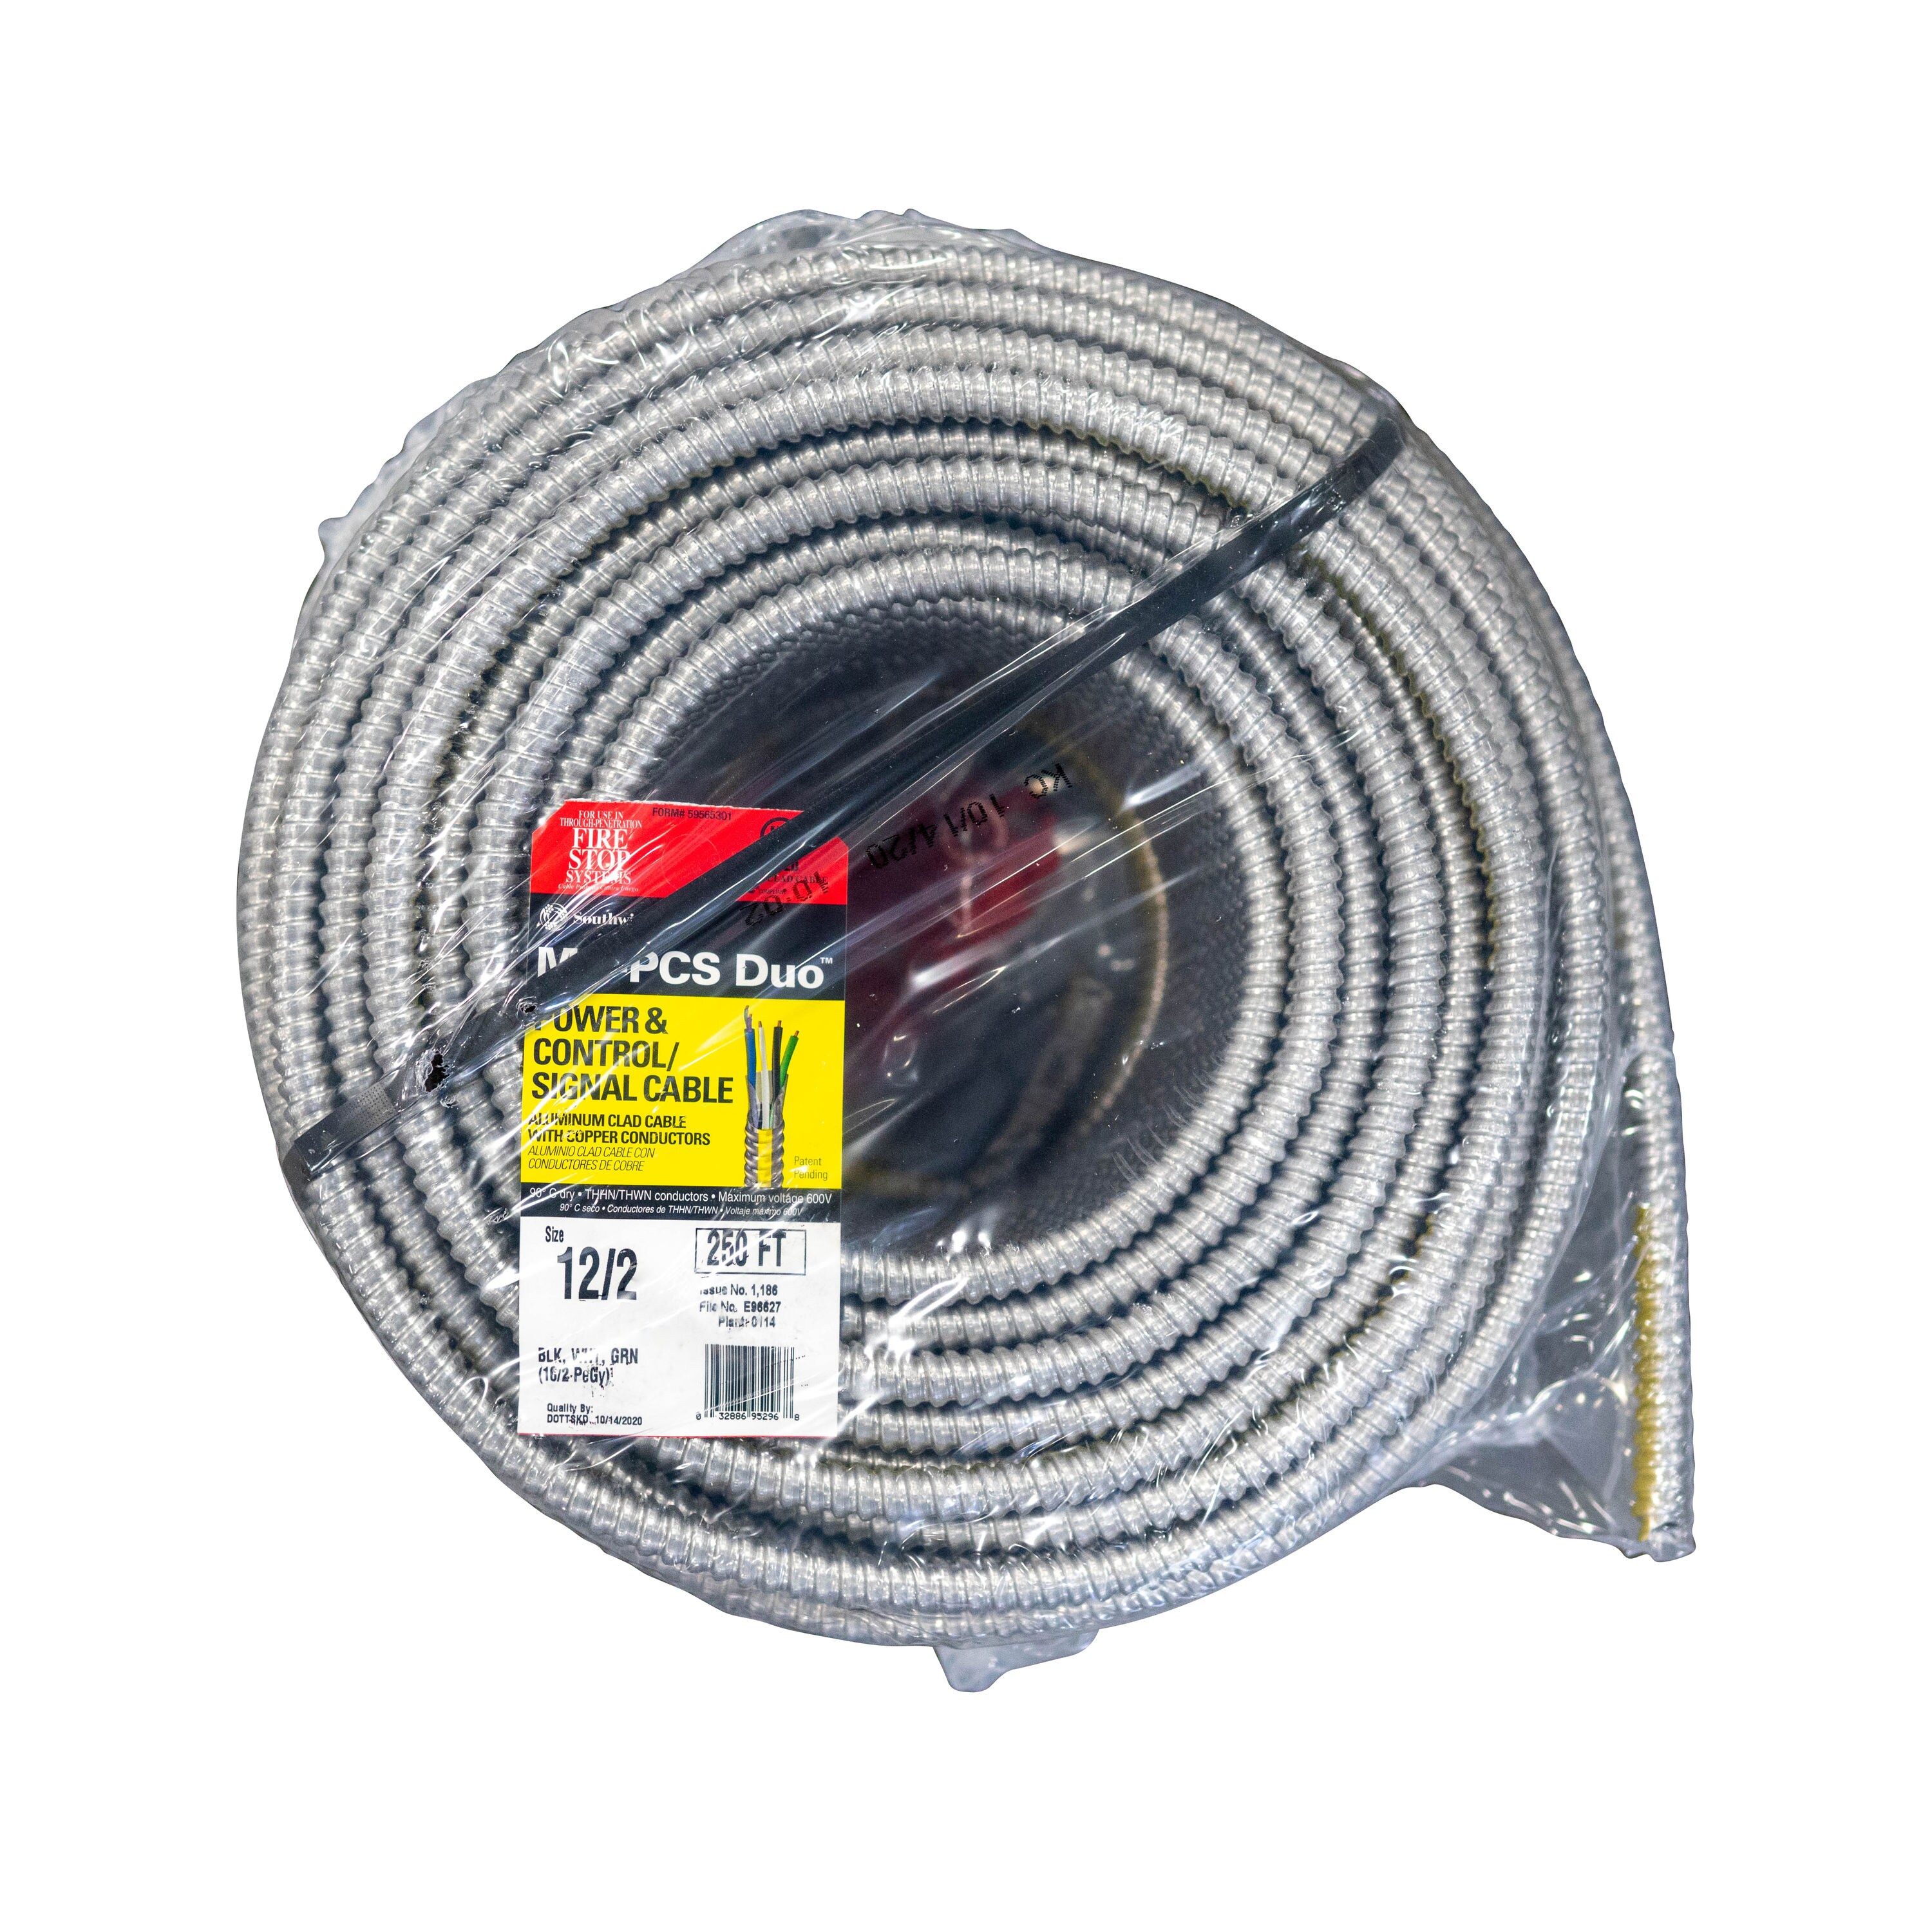 Stranded Copper Metal Clad Aluminum Southwire Armorlite Cable 12/3 x 250 ft 